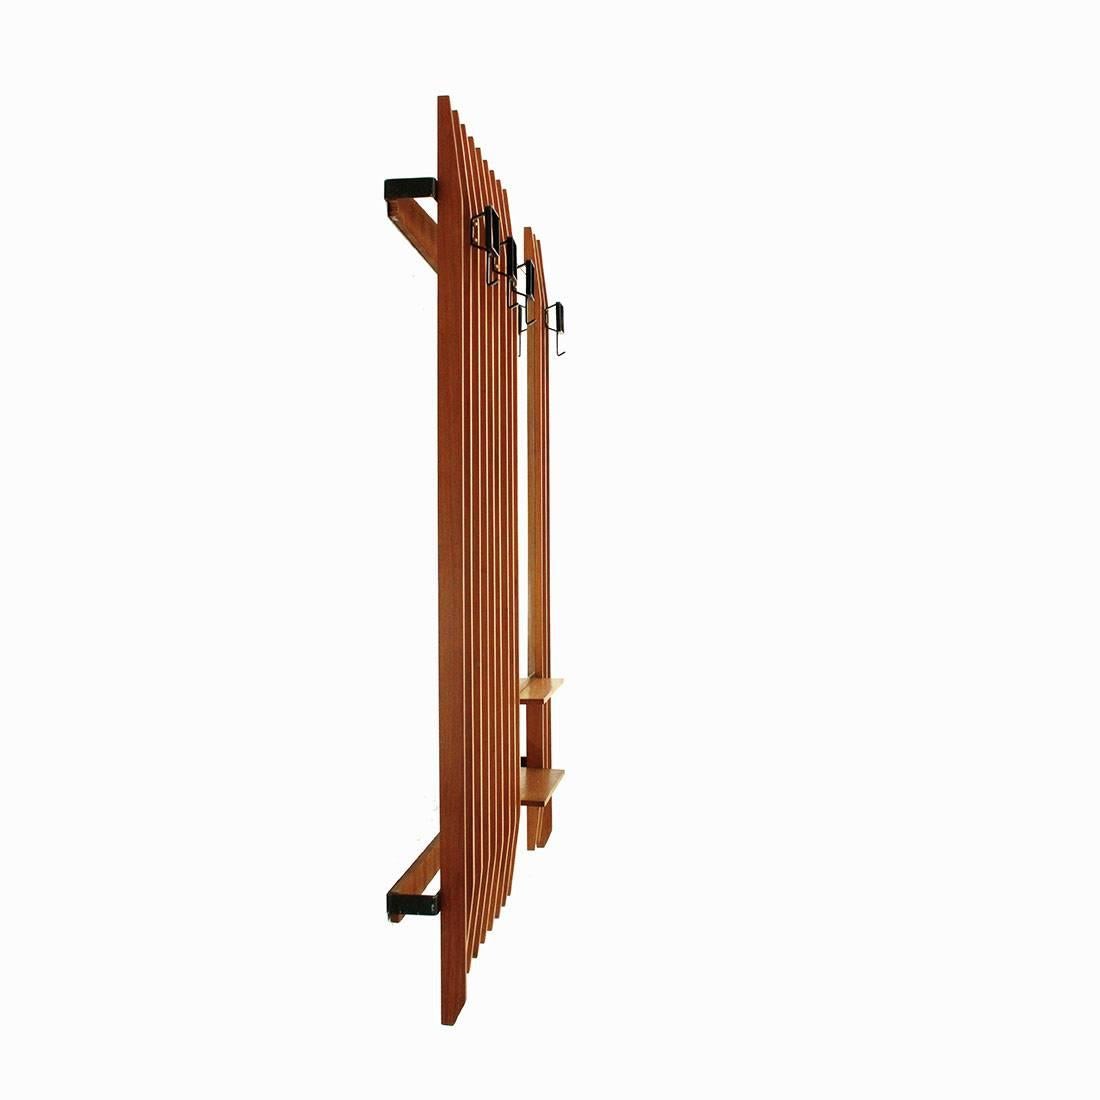 Coat hanger of Italian manufacture produced in the 1950s.
Structure consisting of two bars in black painted metal and teak strips with a tapered finish.
Hooks in black painted metal.
Mirror with upper and lower brass frame.
Two teak